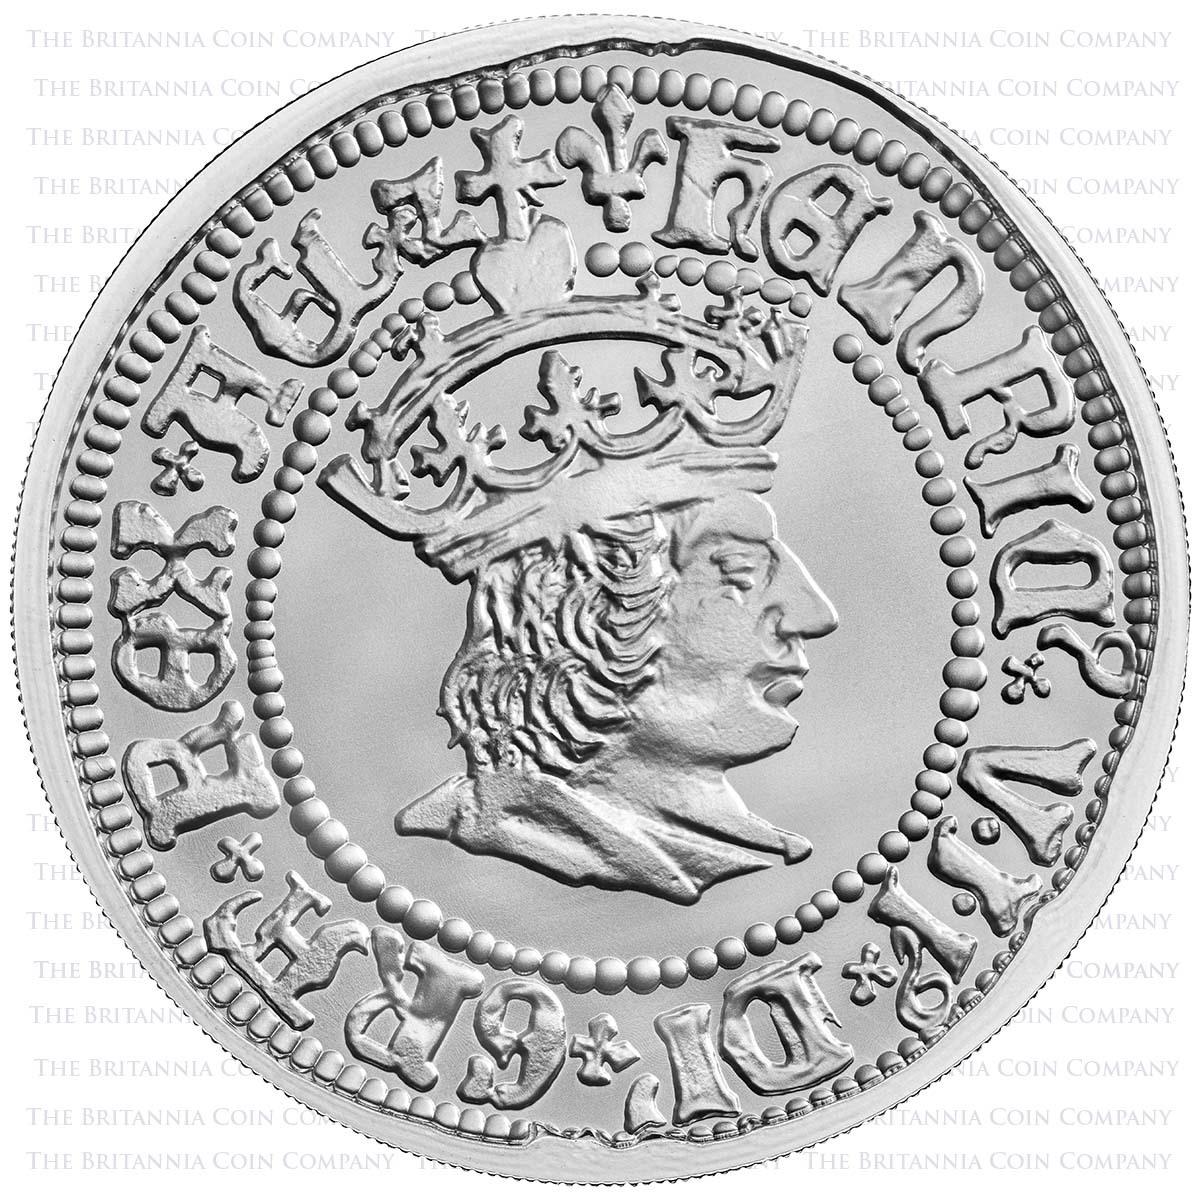 UK22H7S50 2022 British Monarchs Henry VII 5 Ounce Silver Proof Reverse